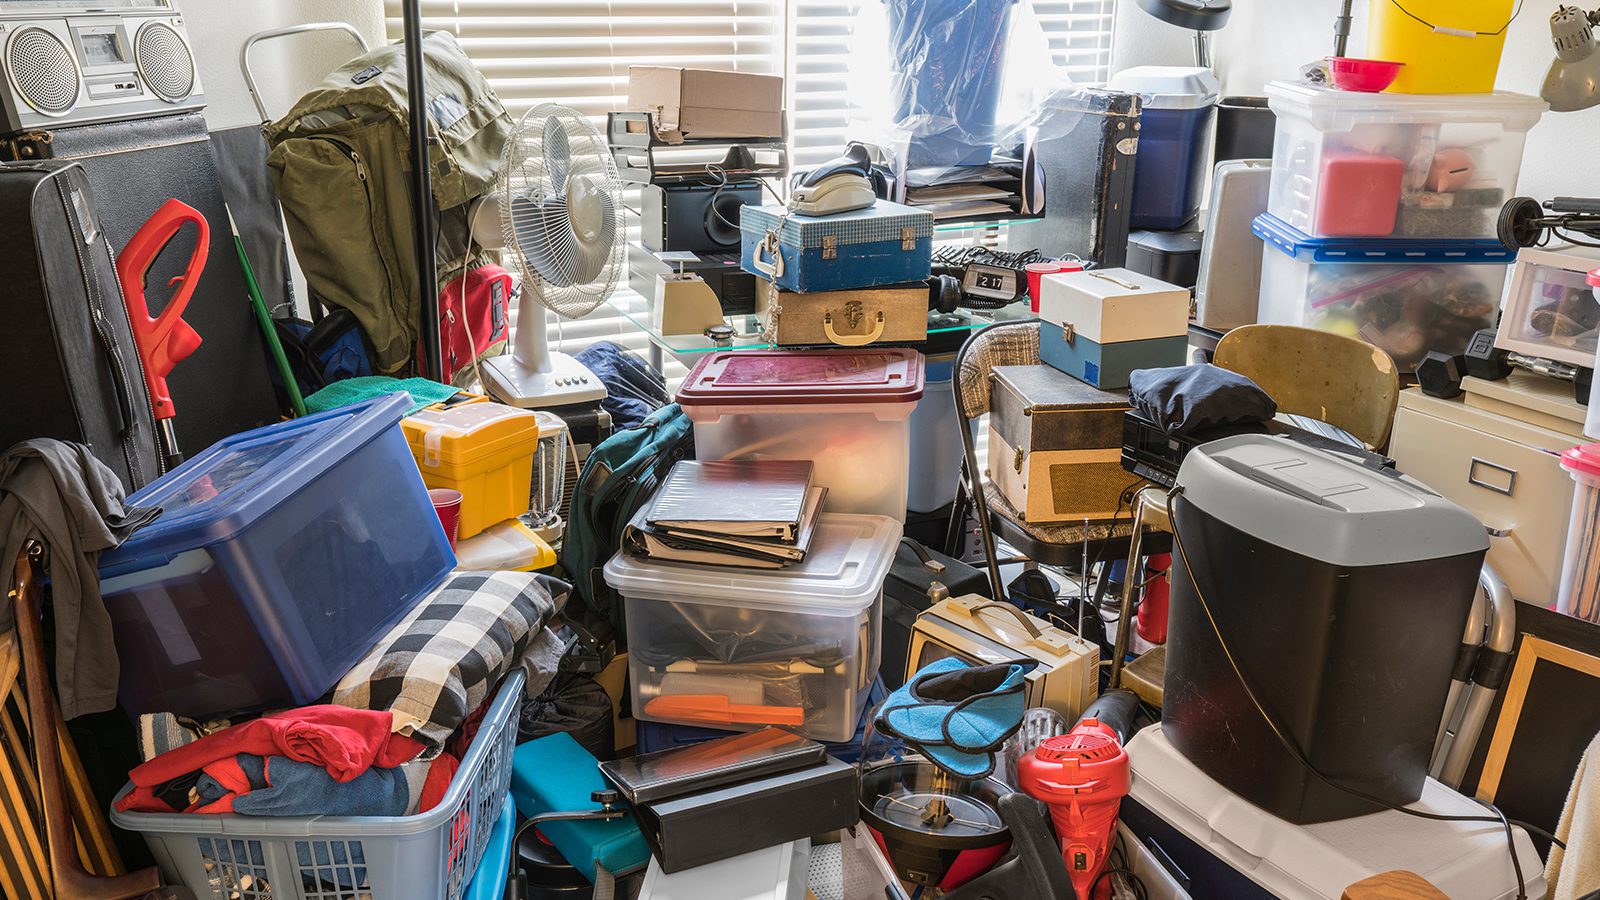 Psychology Explains How Too Much Clutter Holds You Back